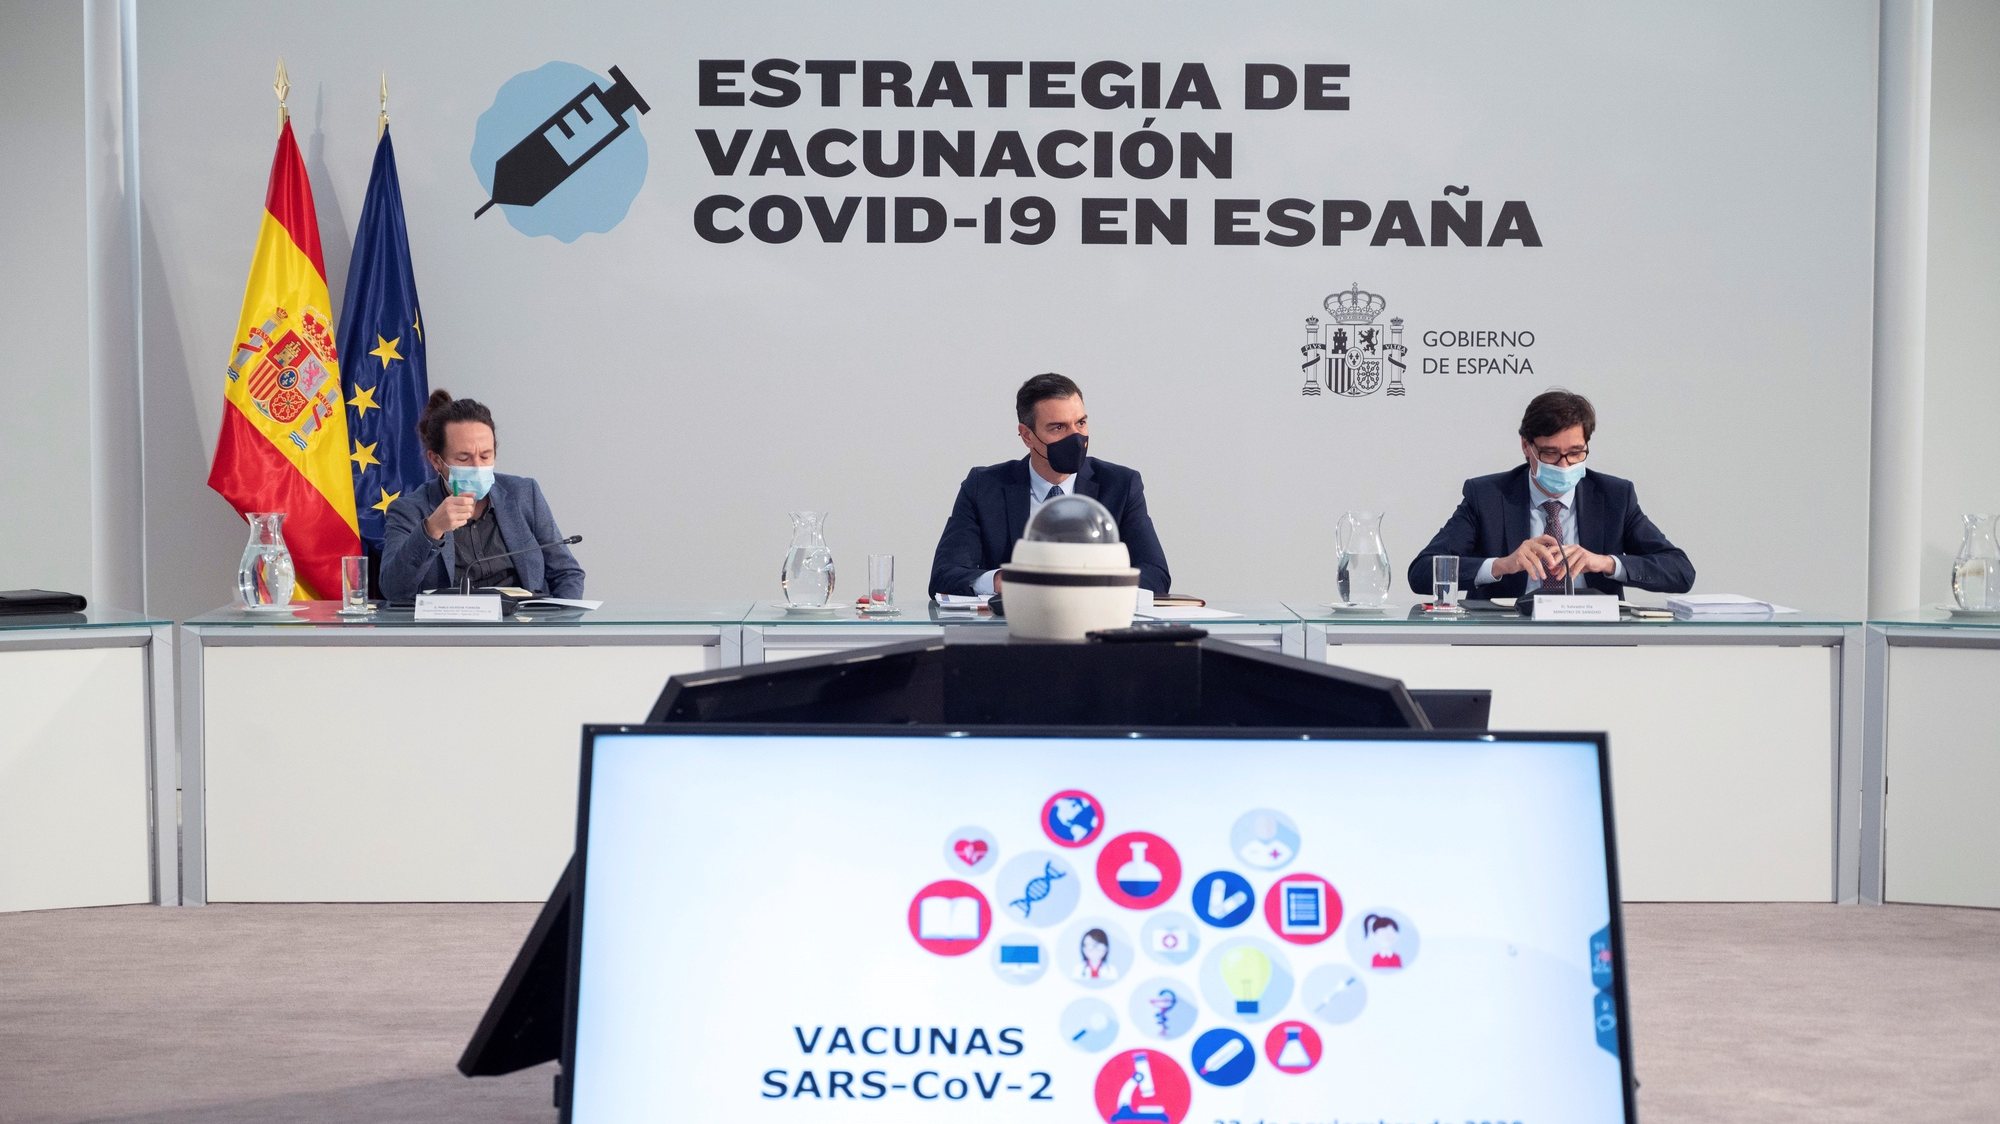 epa08837716 A handout picture made available by Moncloa&#039;s Presidential Palace shows Spanish Prime Minister Pedro Sanchez (C), Spanish Second Deputy Prime Minister Pablo Iglesias (L) and Spanish Health Minister Salvador Illa (R), during the meeting of the COVID-19 and Vaccine Follow-up Committee, in Madrid, central Spain, 23 November 2020.  EPA/MONCLOA PALACE/ HANDOUT  HANDOUT EDITORIAL USE ONLY/NO SALES